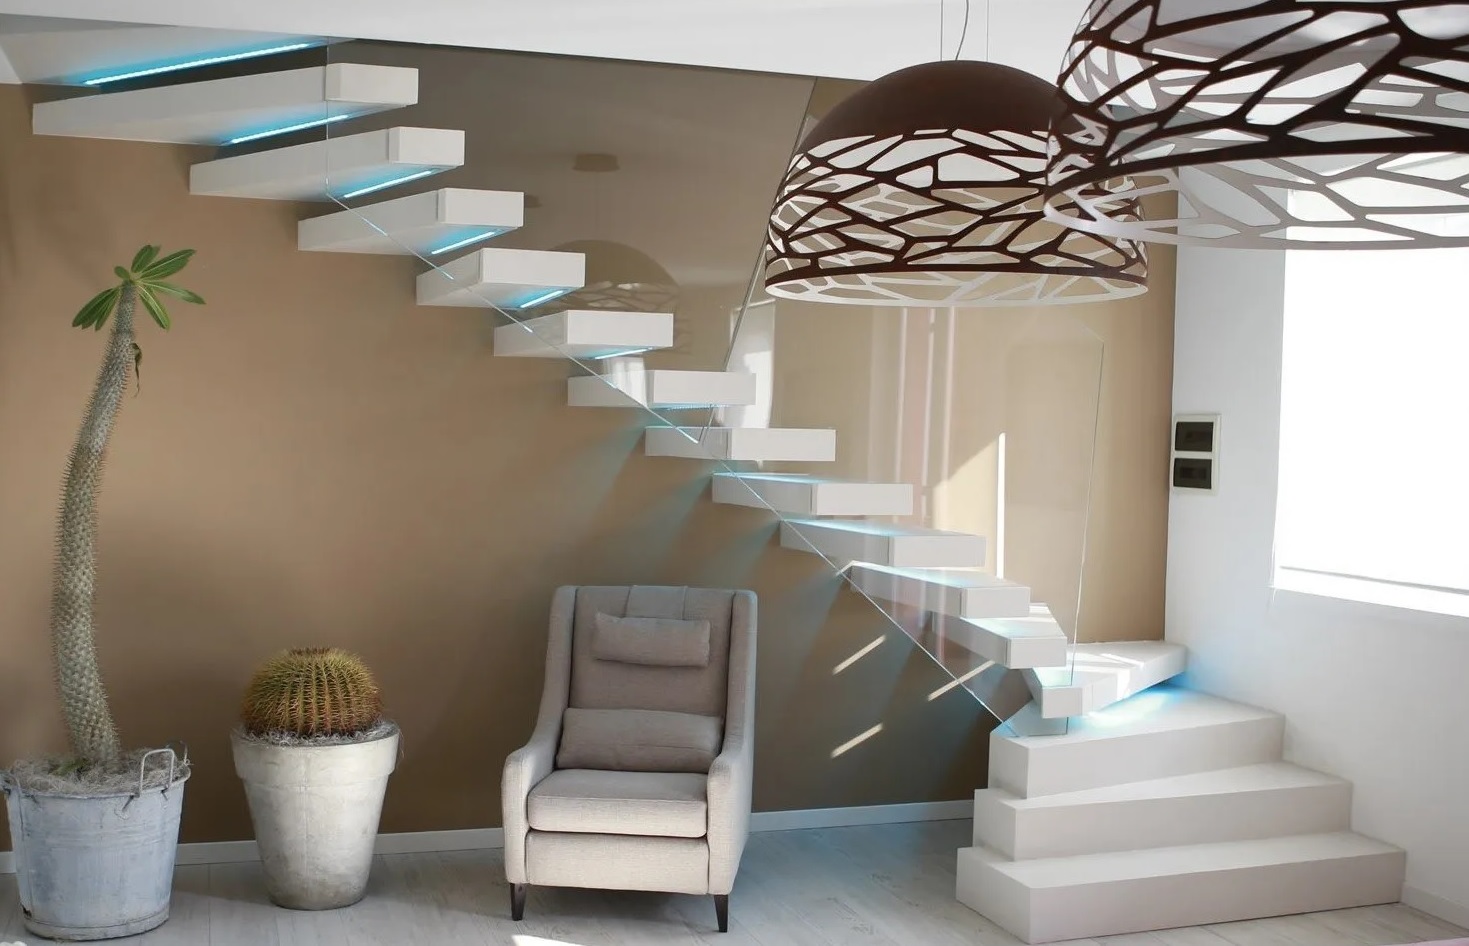 https://www.granddesignstairs.com/wp-content/uploads/2021/04/amazing-modern-white-staircases-white-floating-staircase.jpg